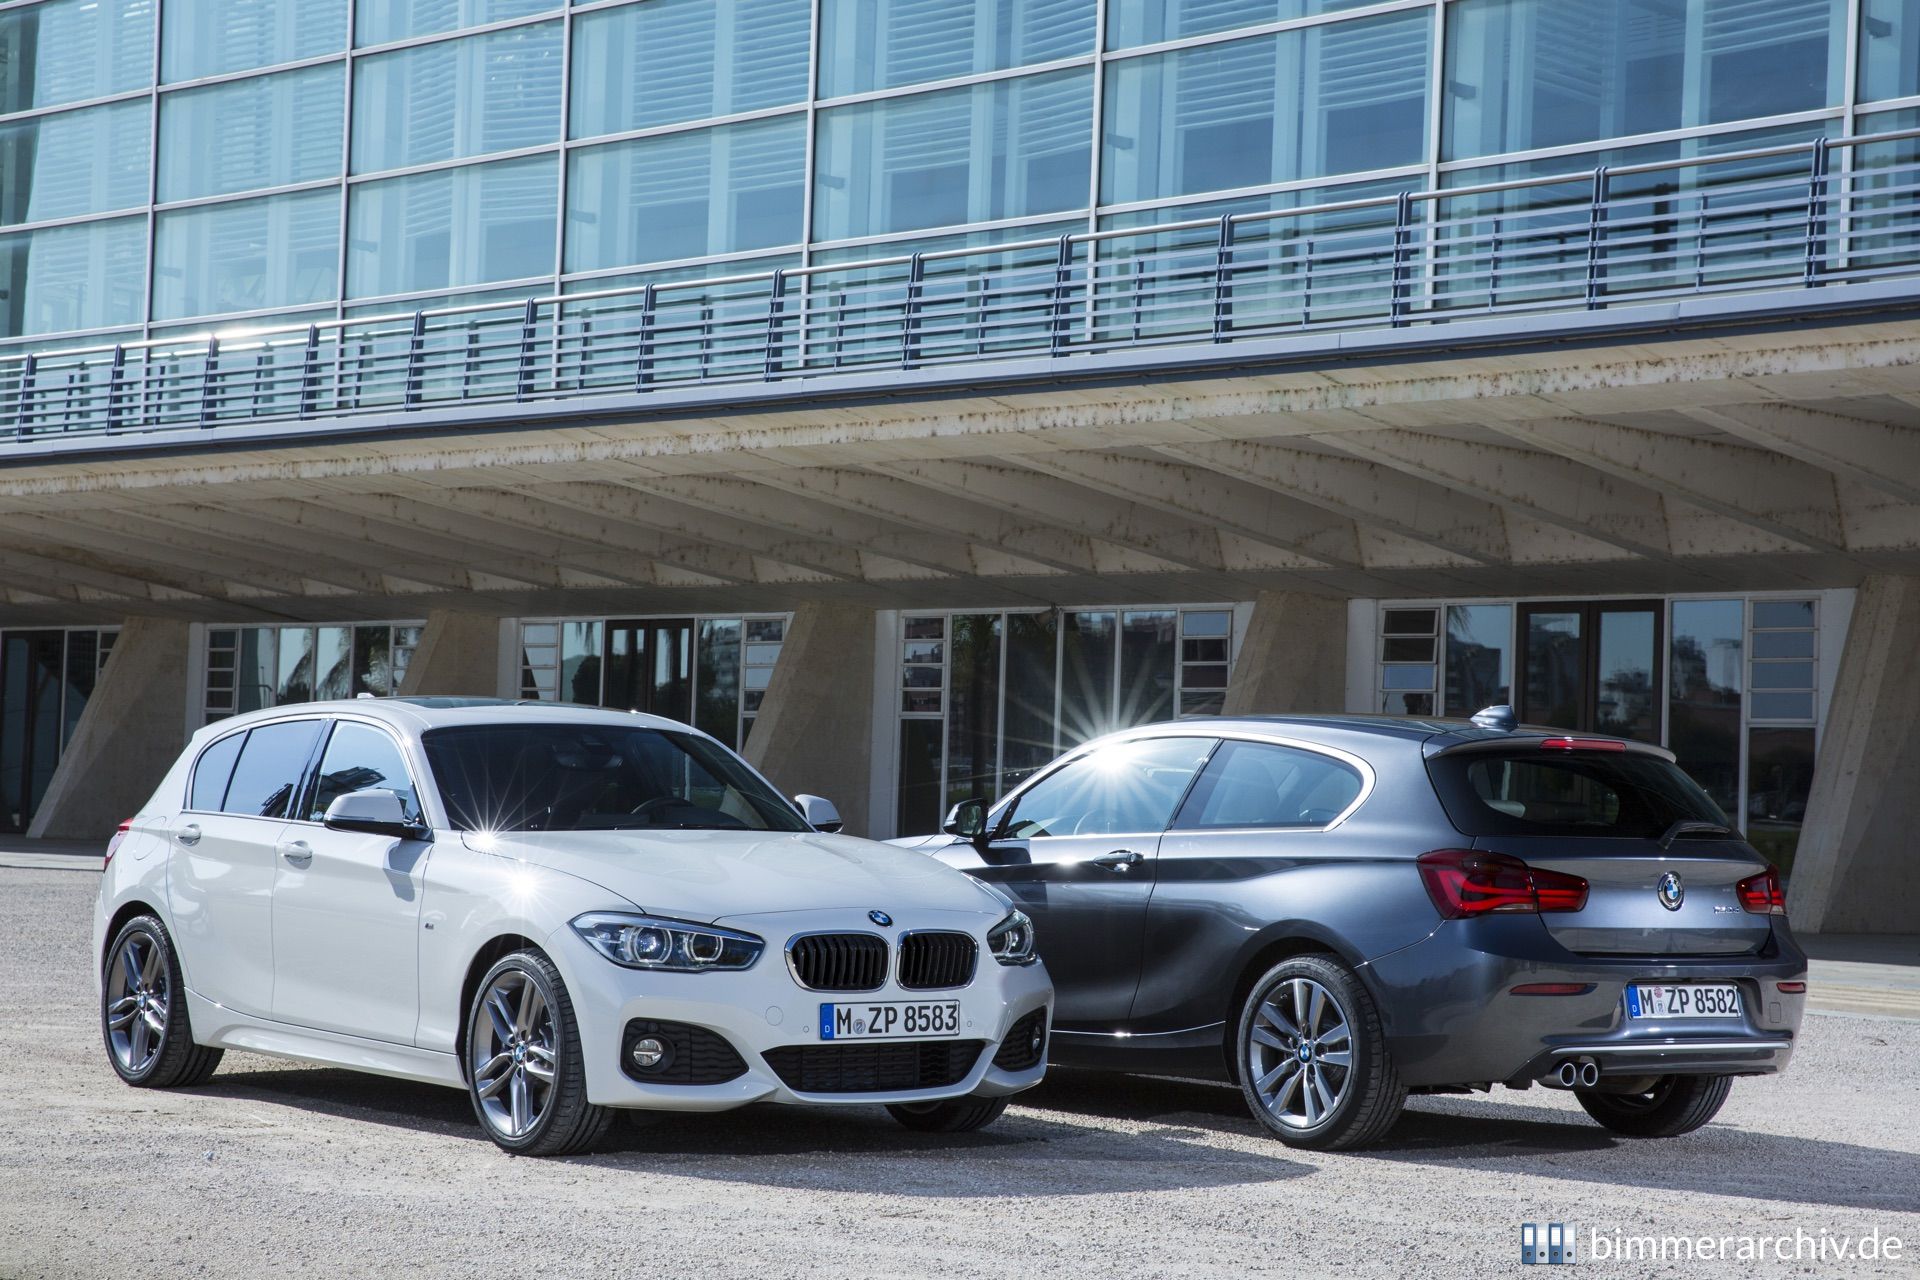 BMW 120d and 125i